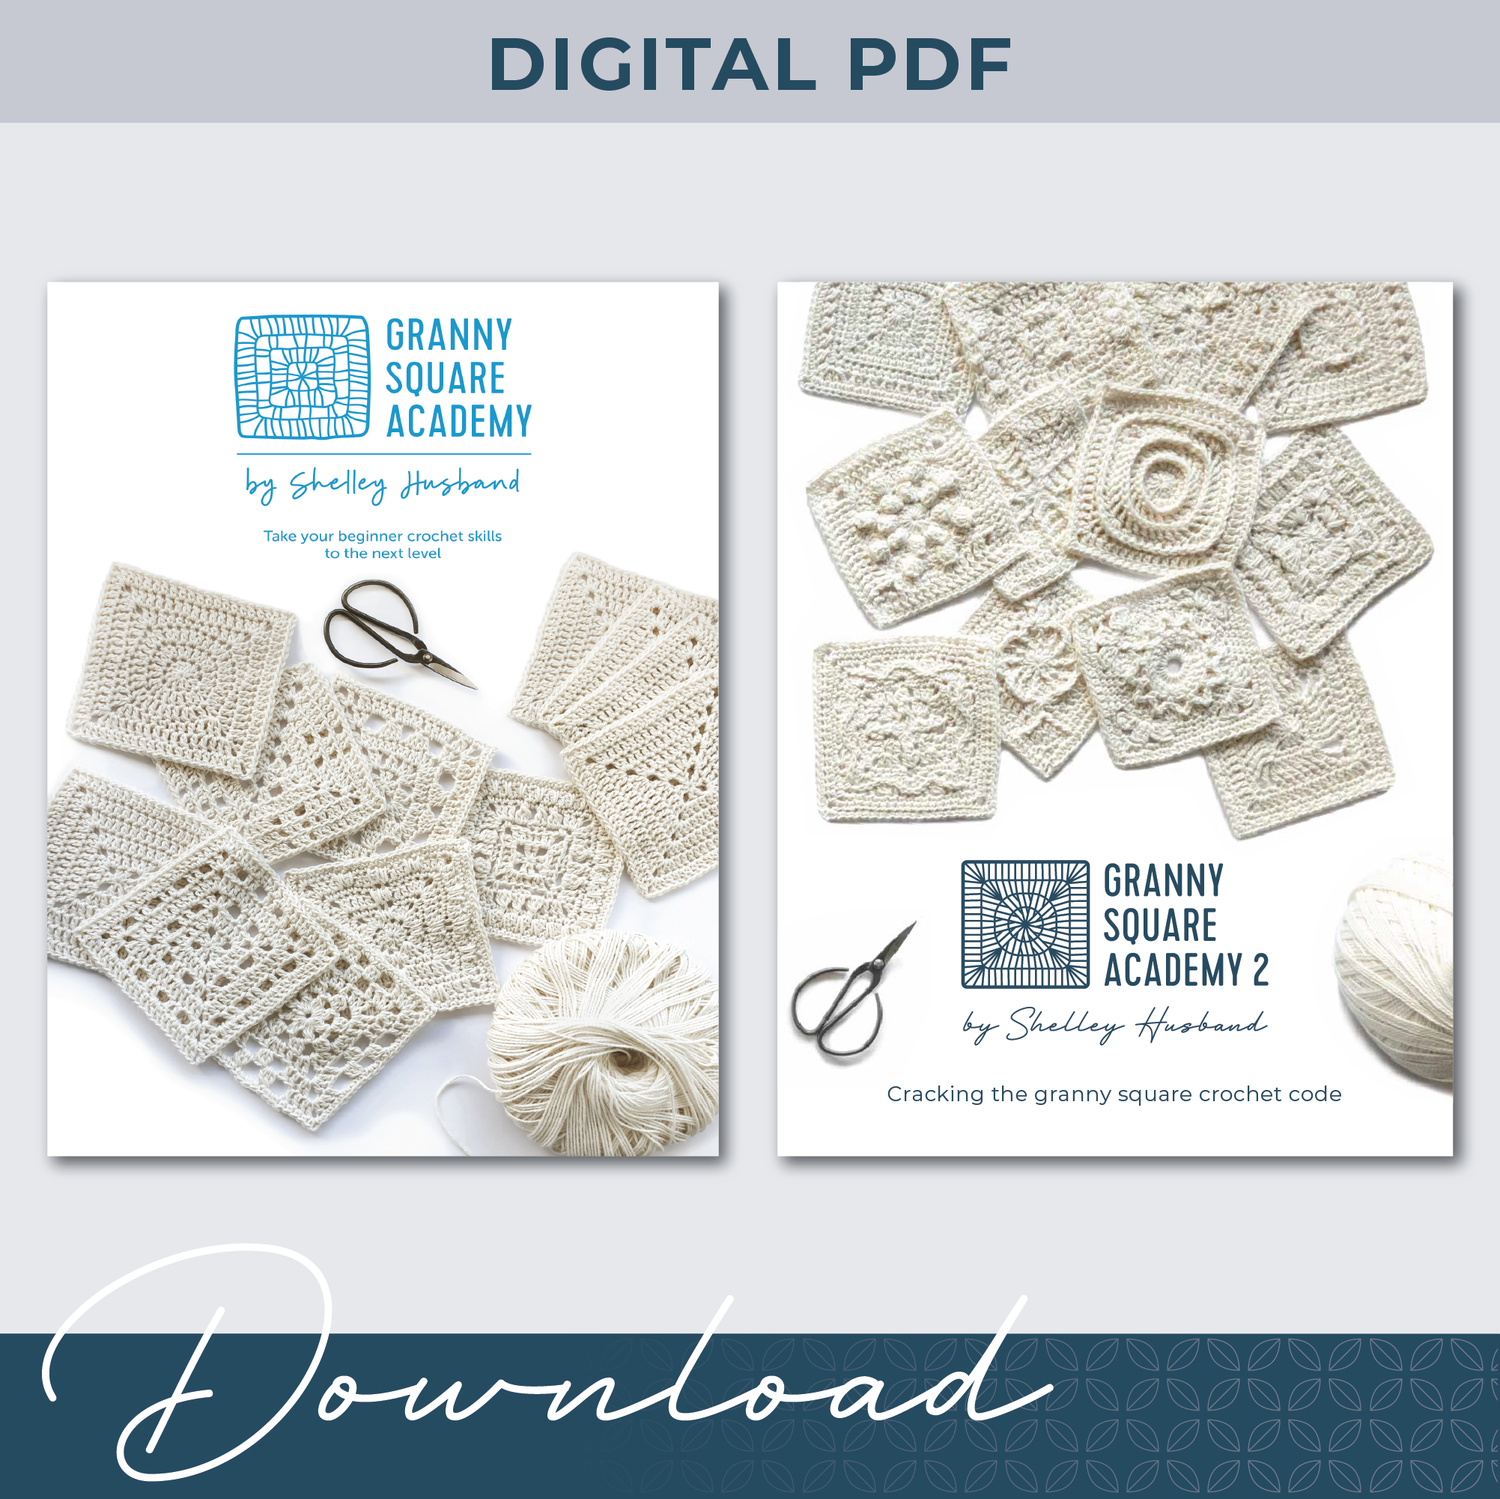 The front covers of both Granny Square Academy and Granny Square Academy 2. Words over the image say Digital PDFs and Download.